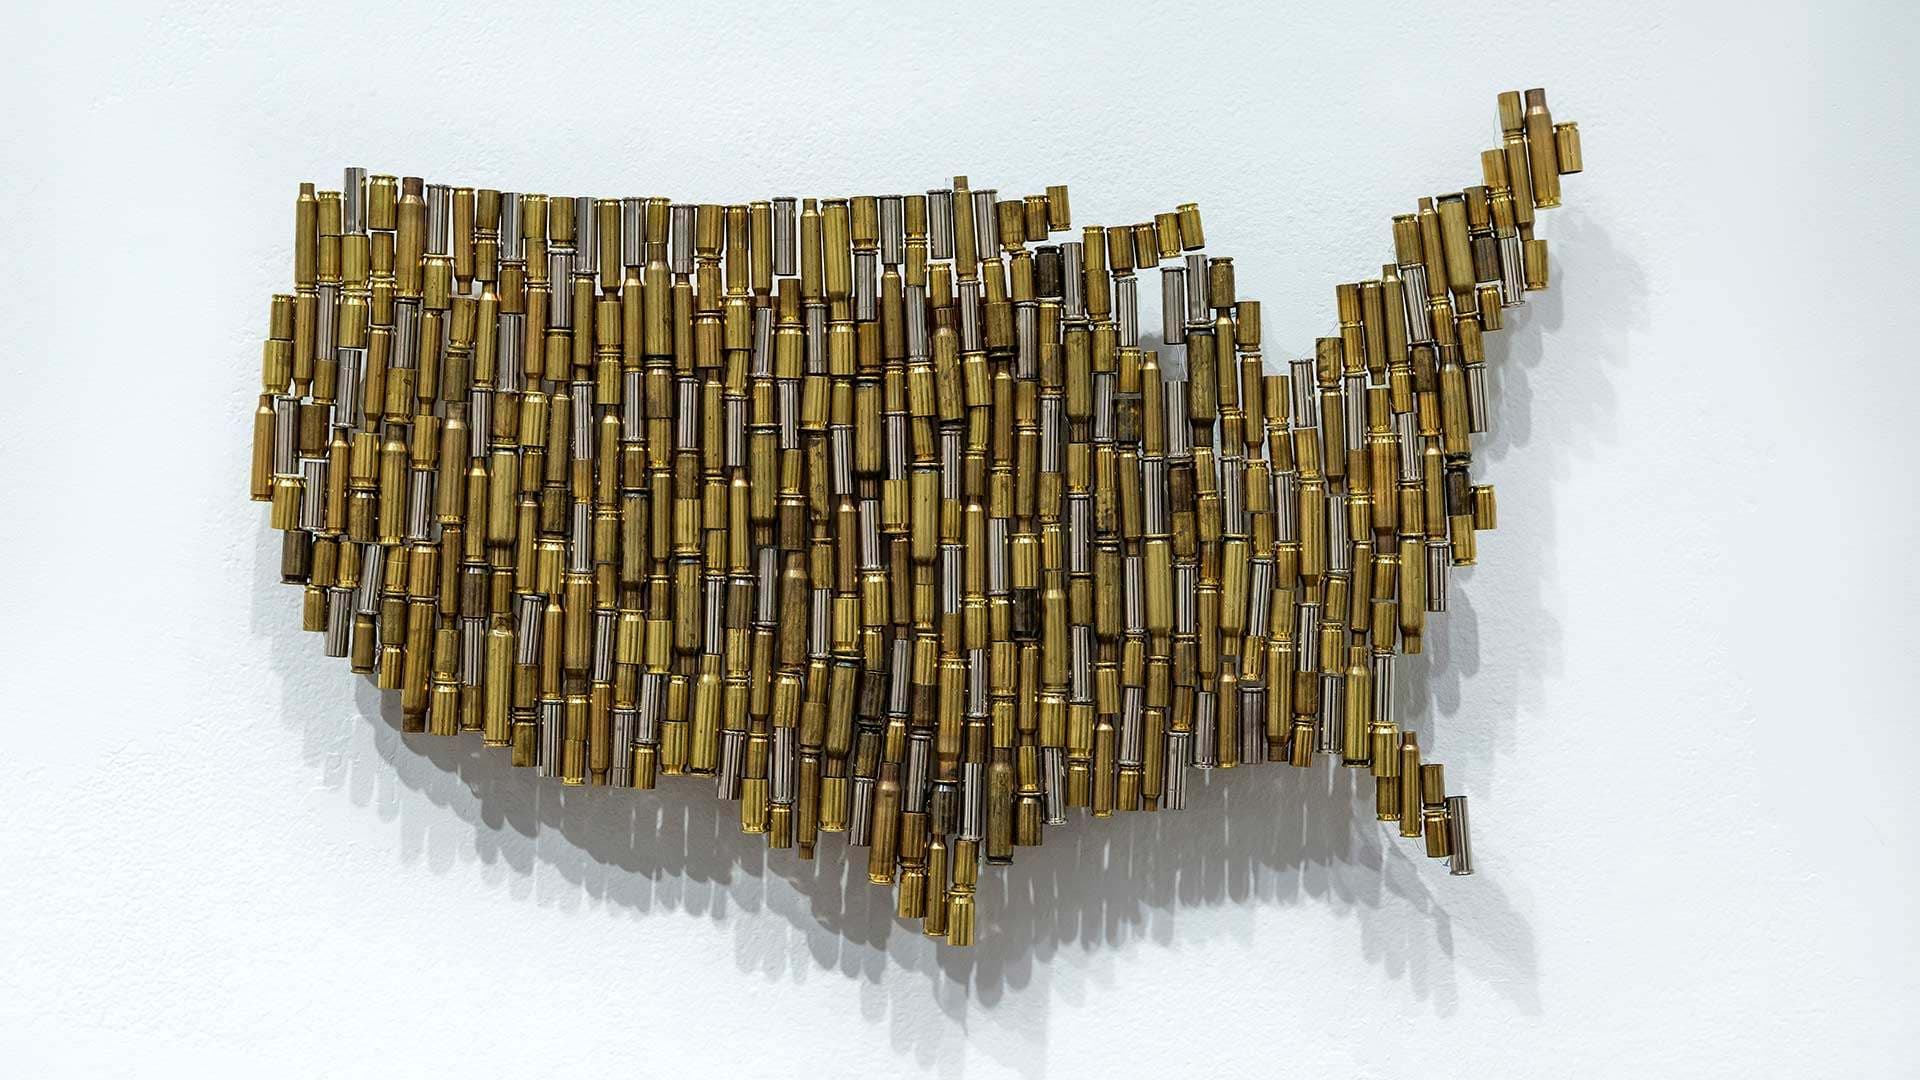 bullet casings in the shape of the United States